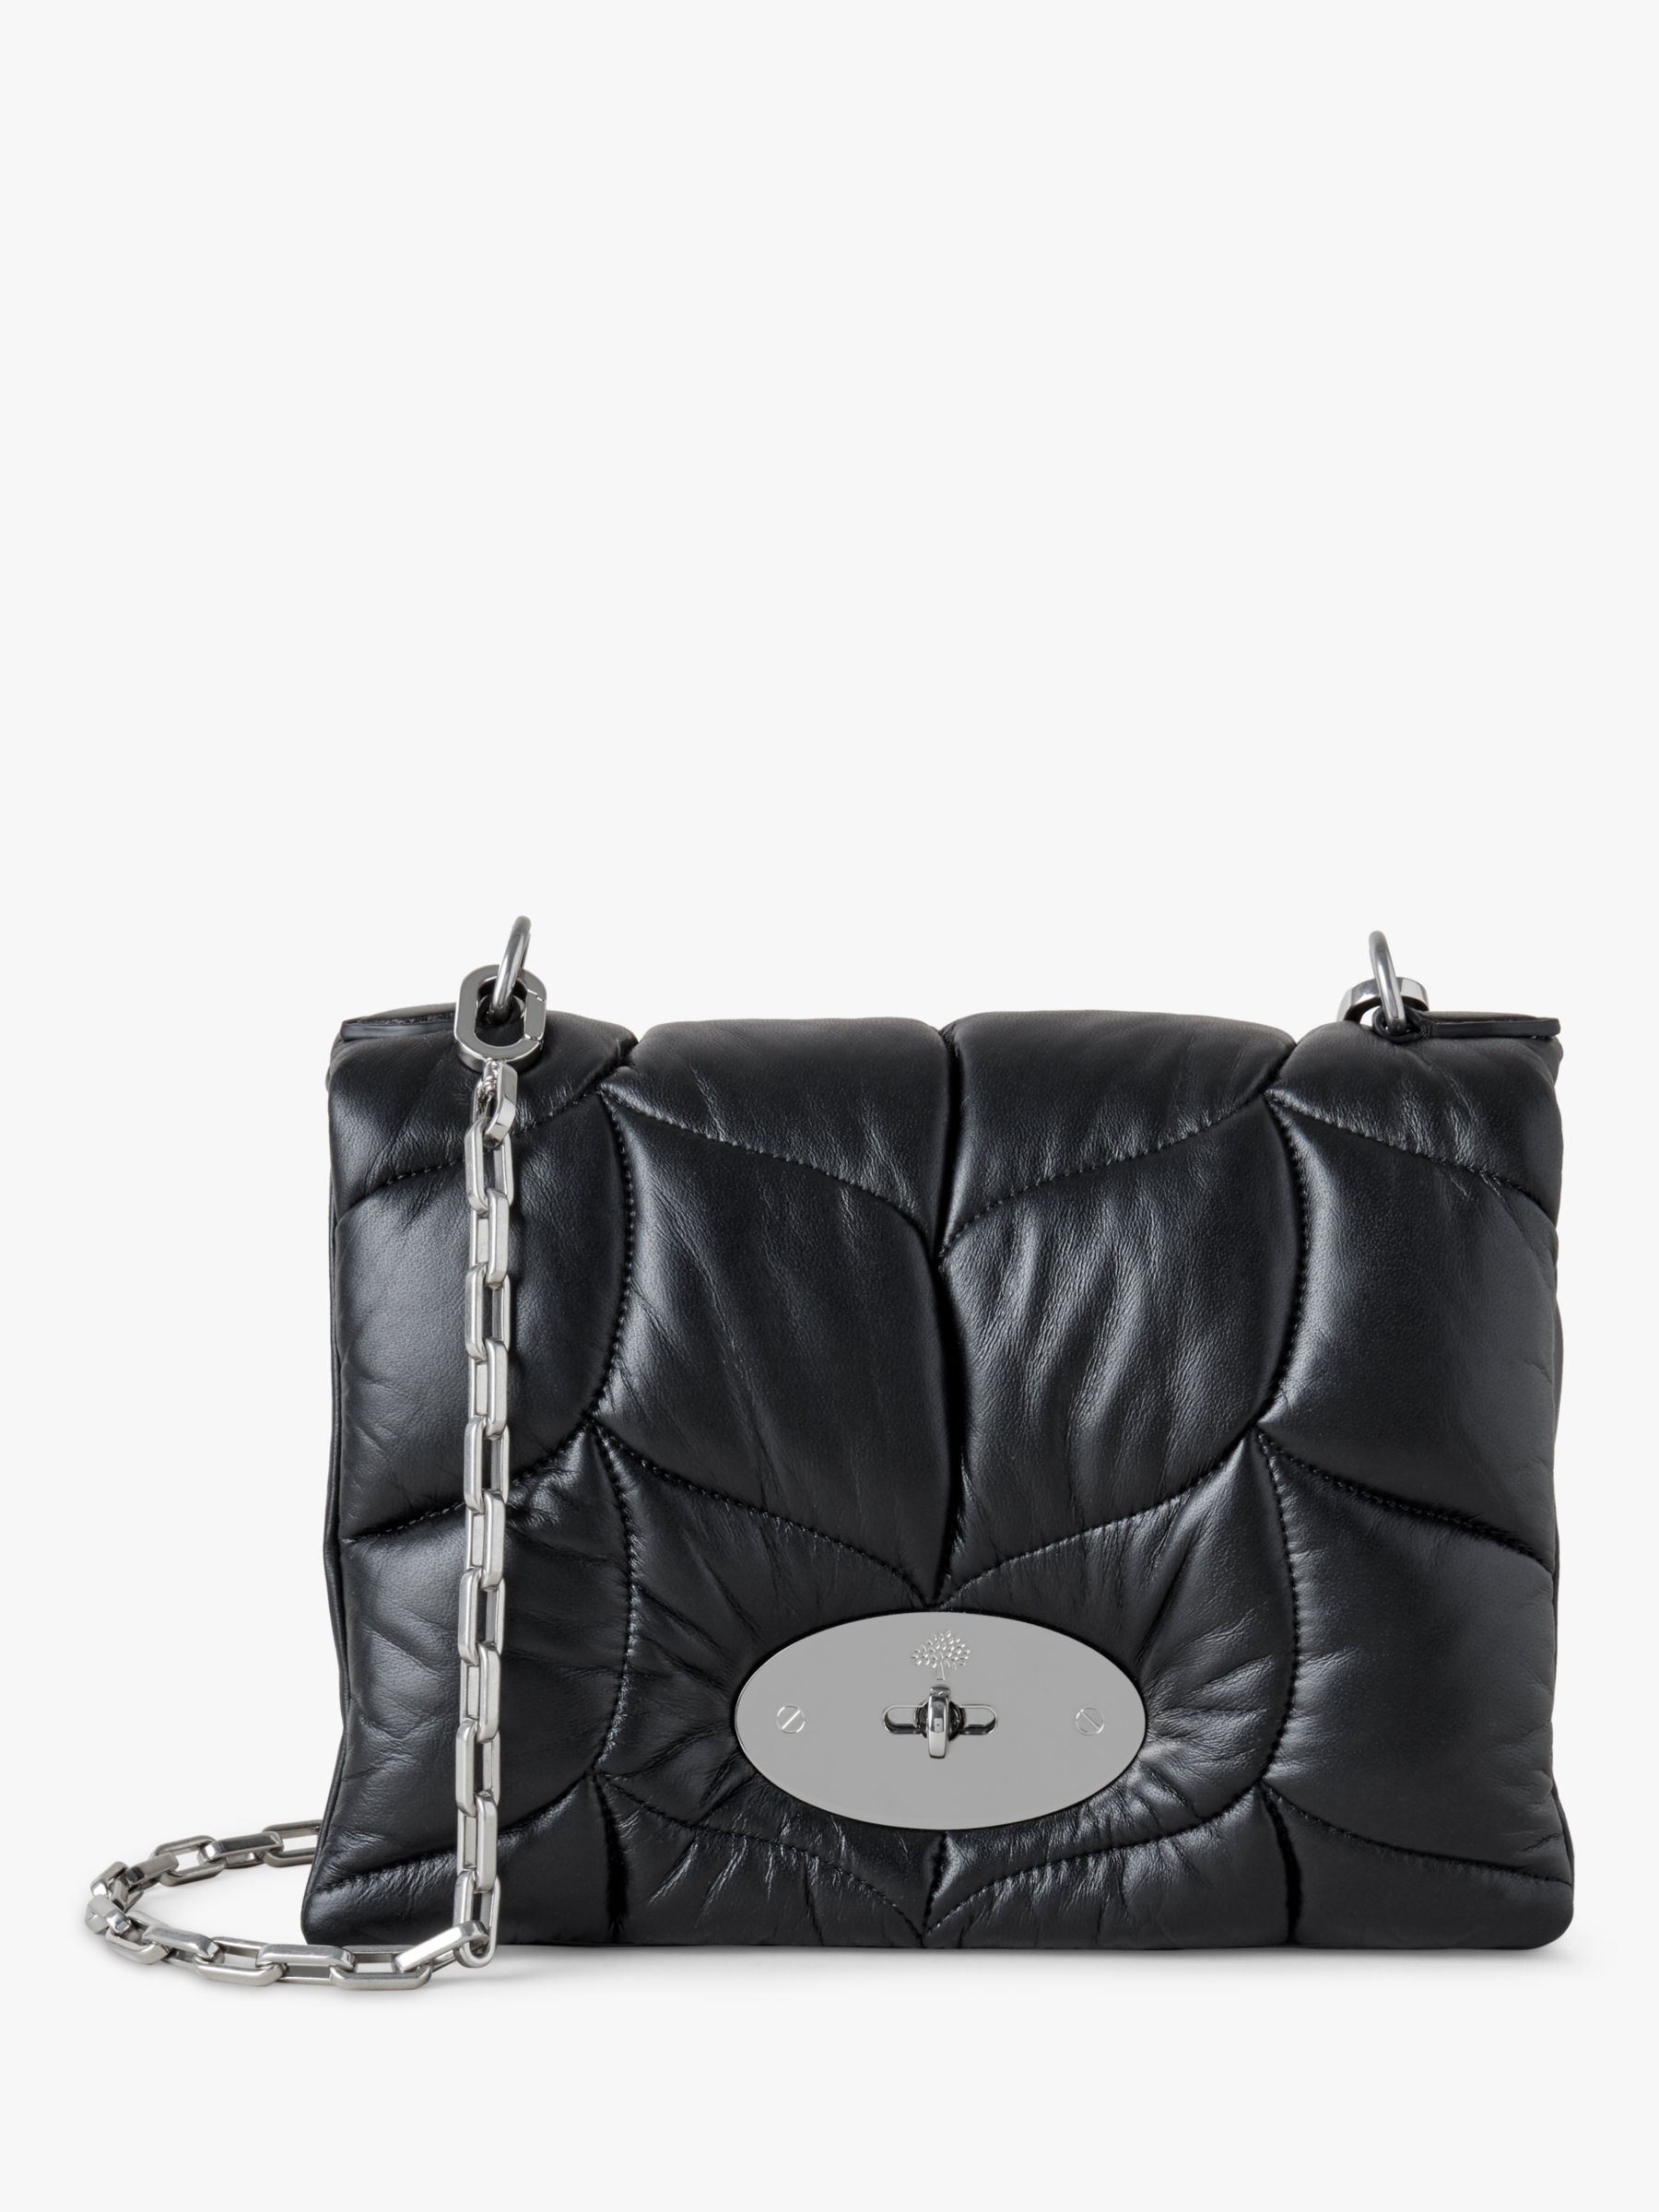 chanel chesterfield flap bag